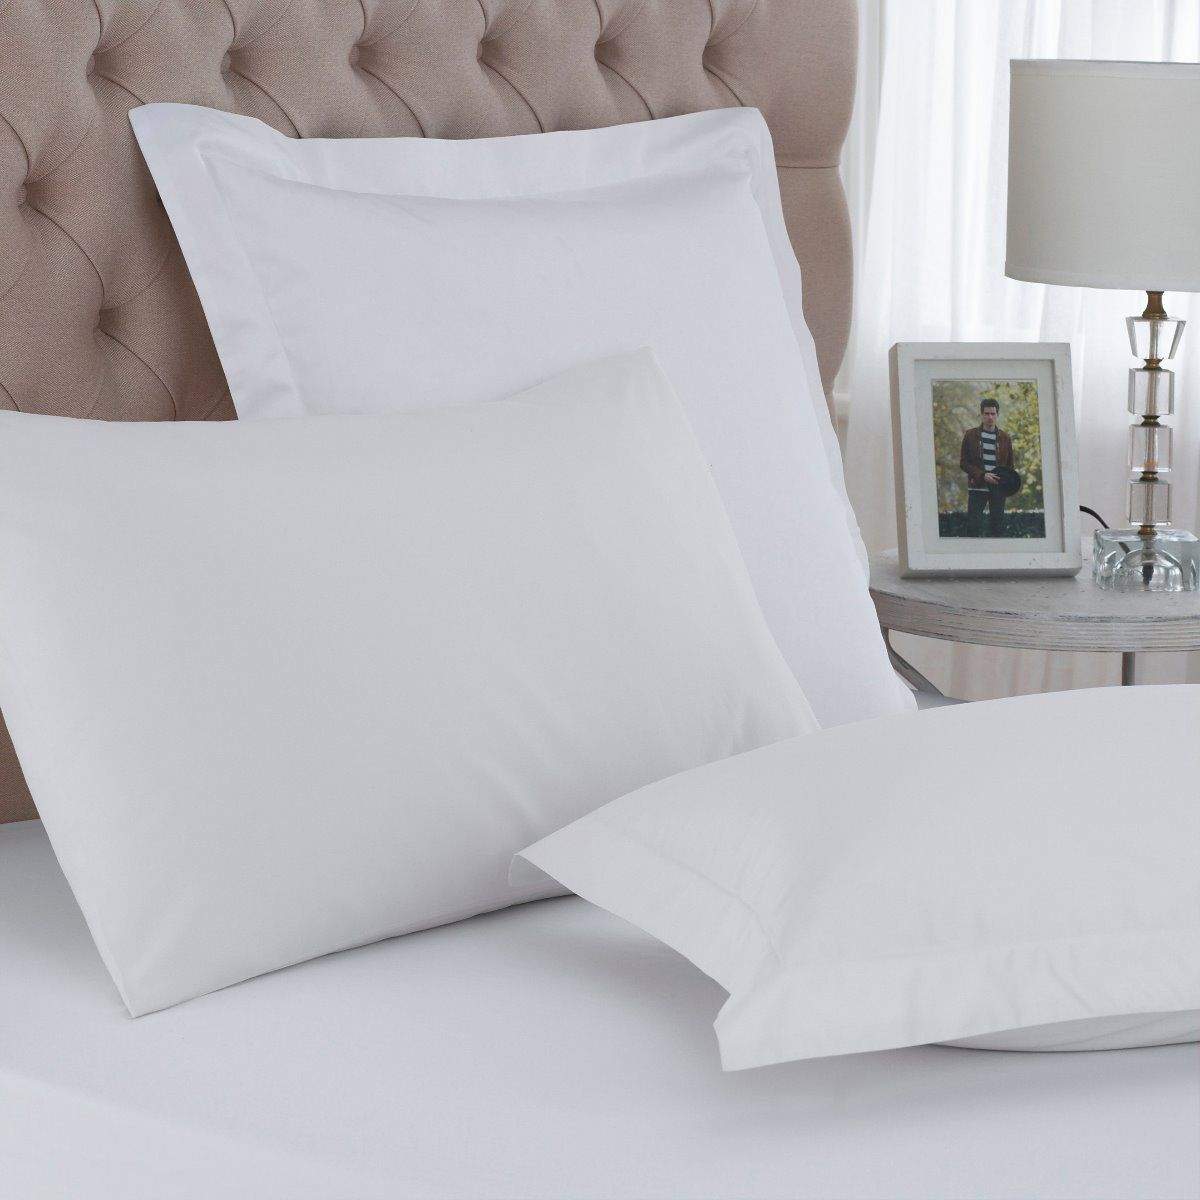 hotel quality bed linen